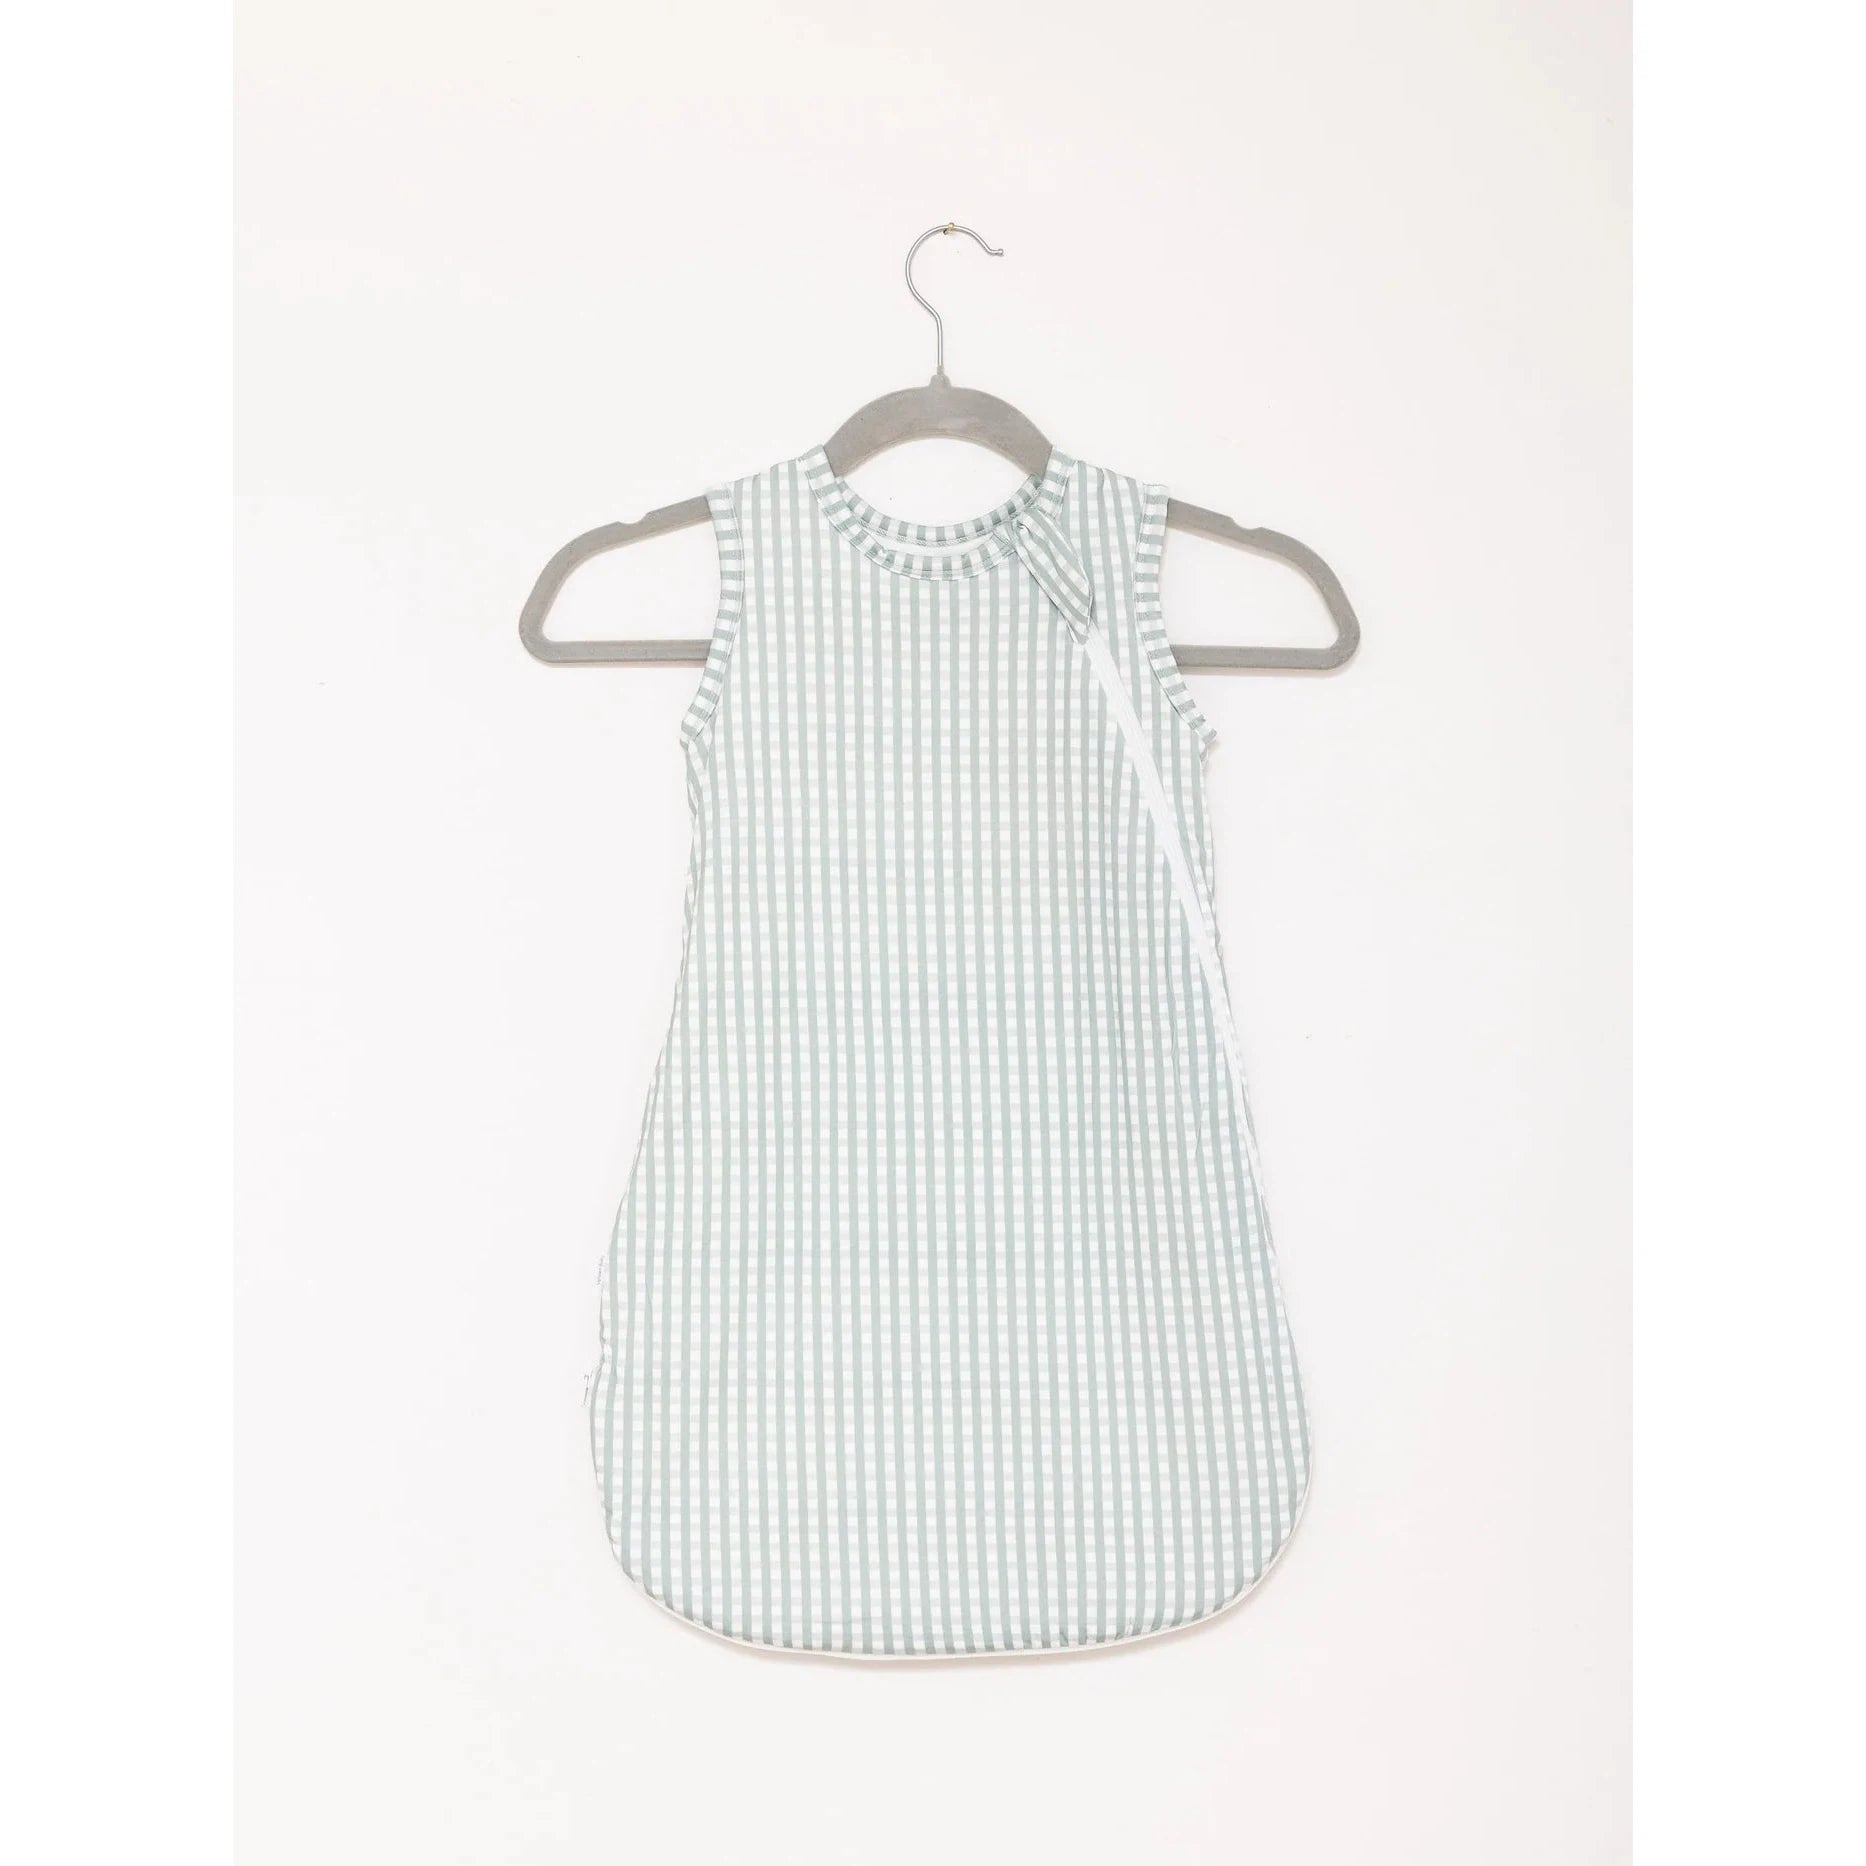 The Uptown Baby A+ Sleep Bag - Sage Gingham-The Uptown Baby-Little Giant Kidz